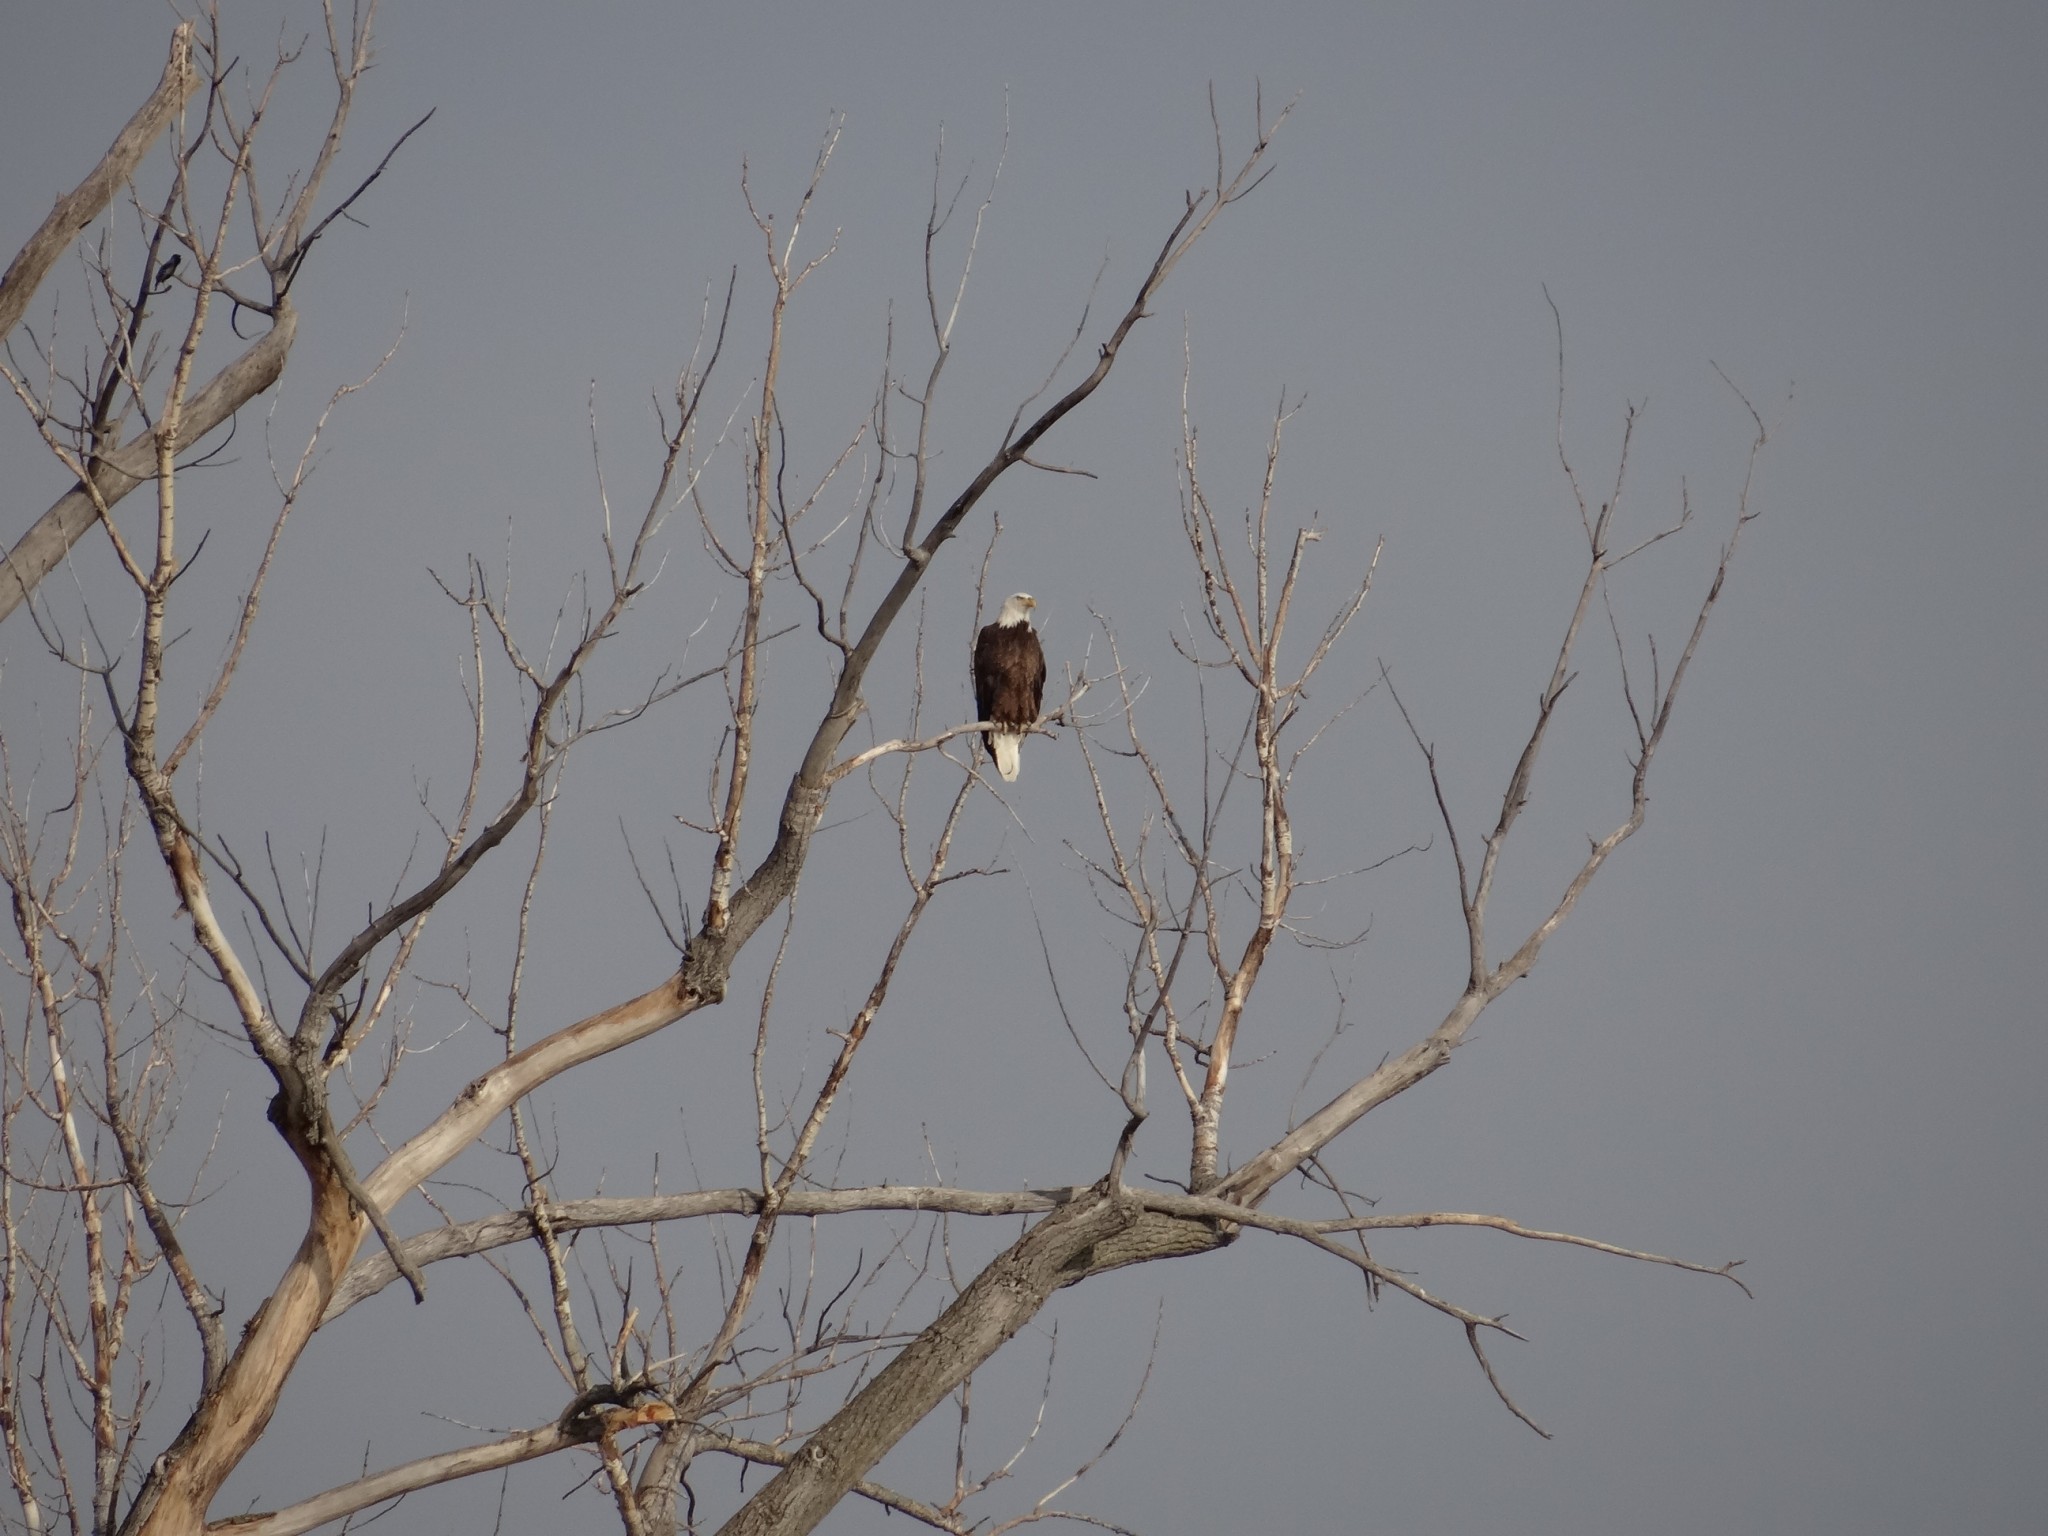 An adult bald eagle is perched in a cottonwood tree along Omaha's Carter Lake. Photo by Greg Wagner.